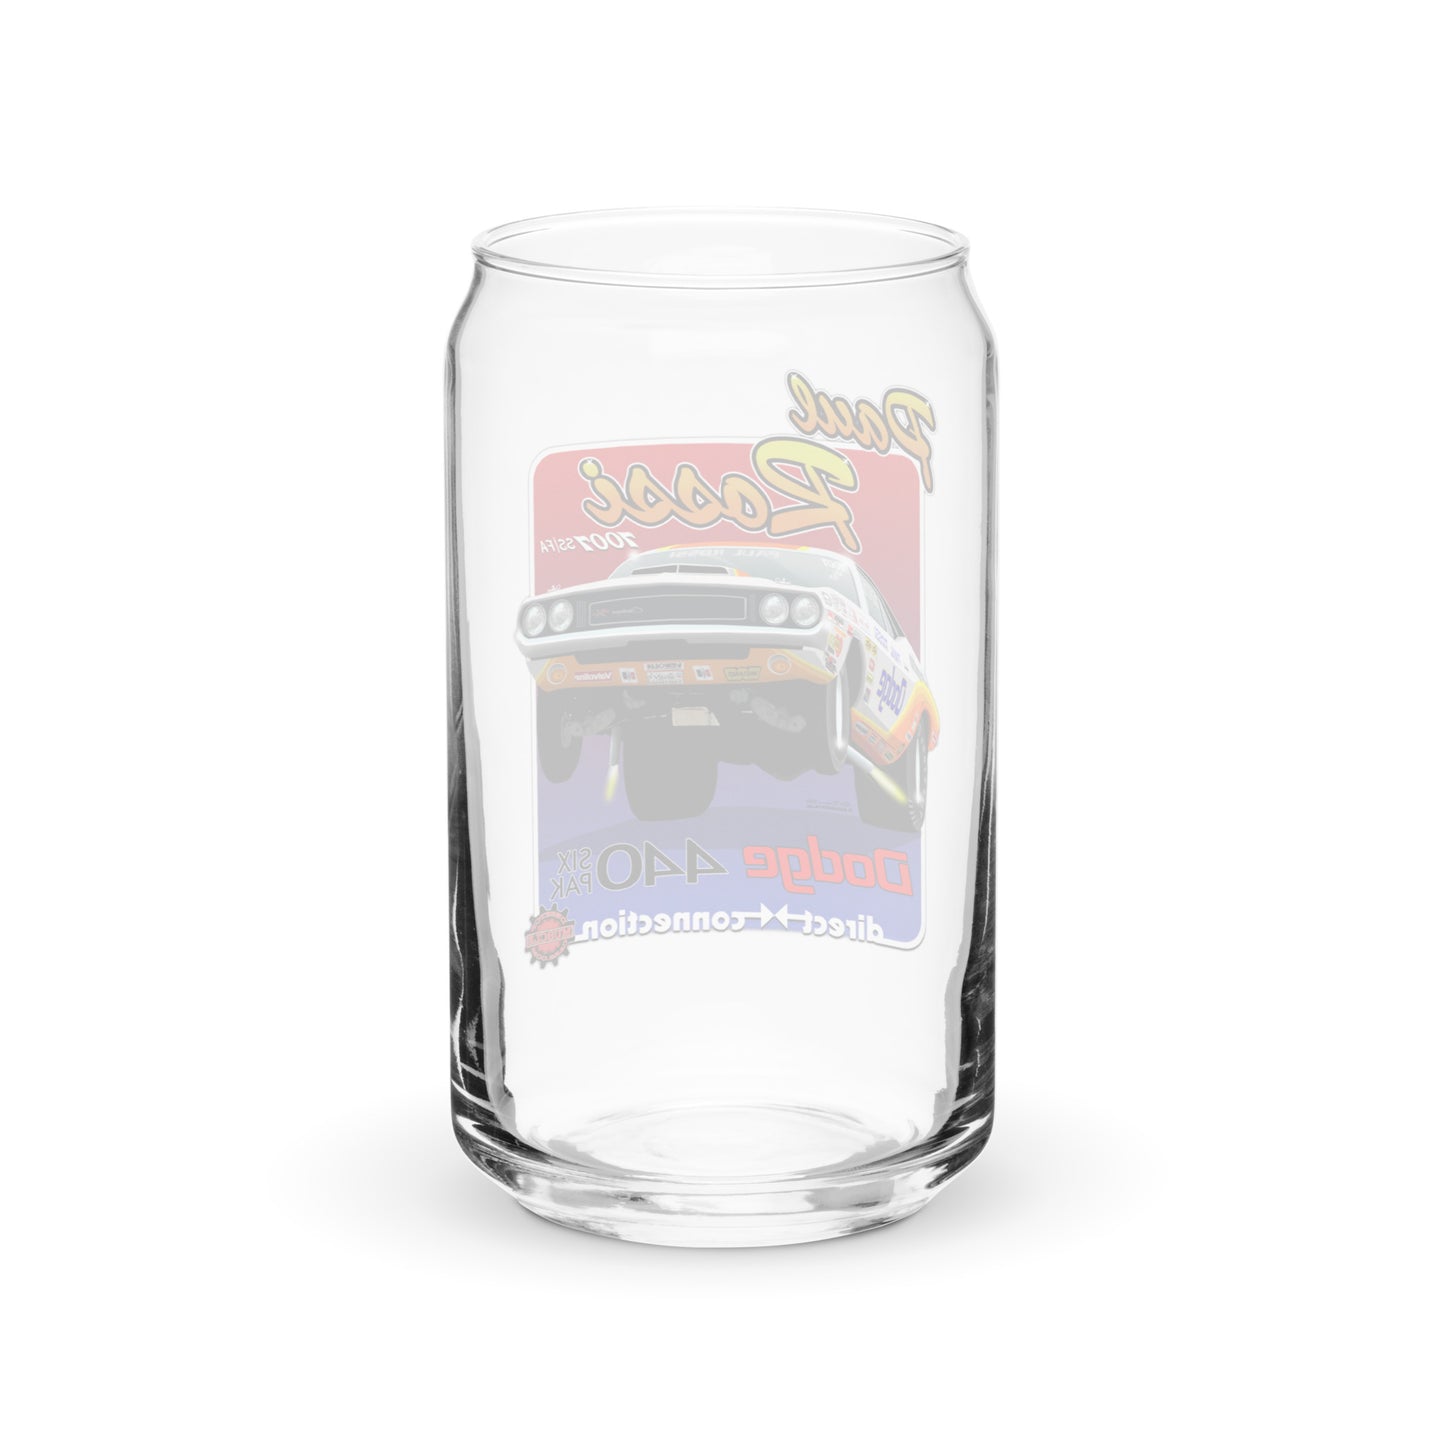 Paul Rossi Challenger Can-shaped glass